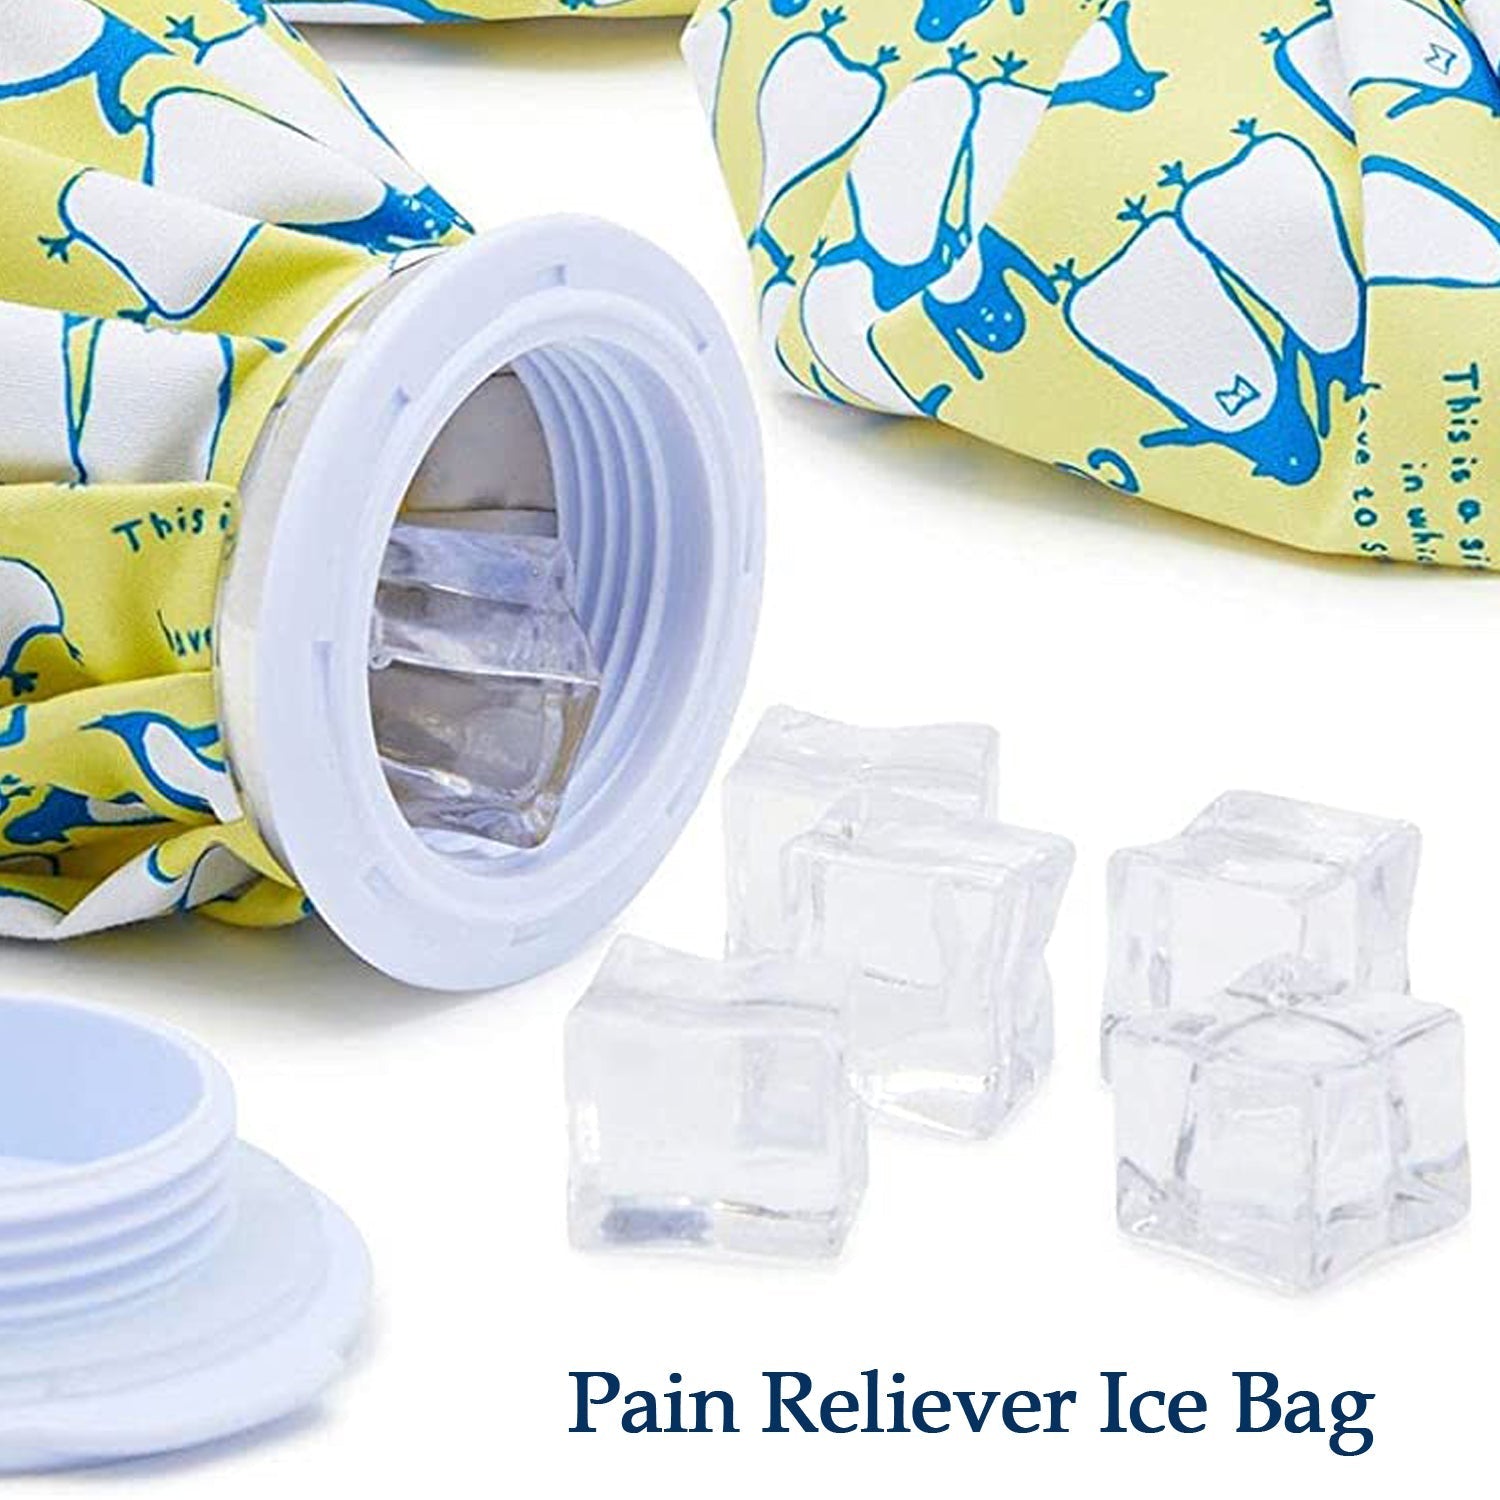 6167 S Pain Reliever Ice Bag Used To Overcome Joints And Muscles Pain In The Body. 